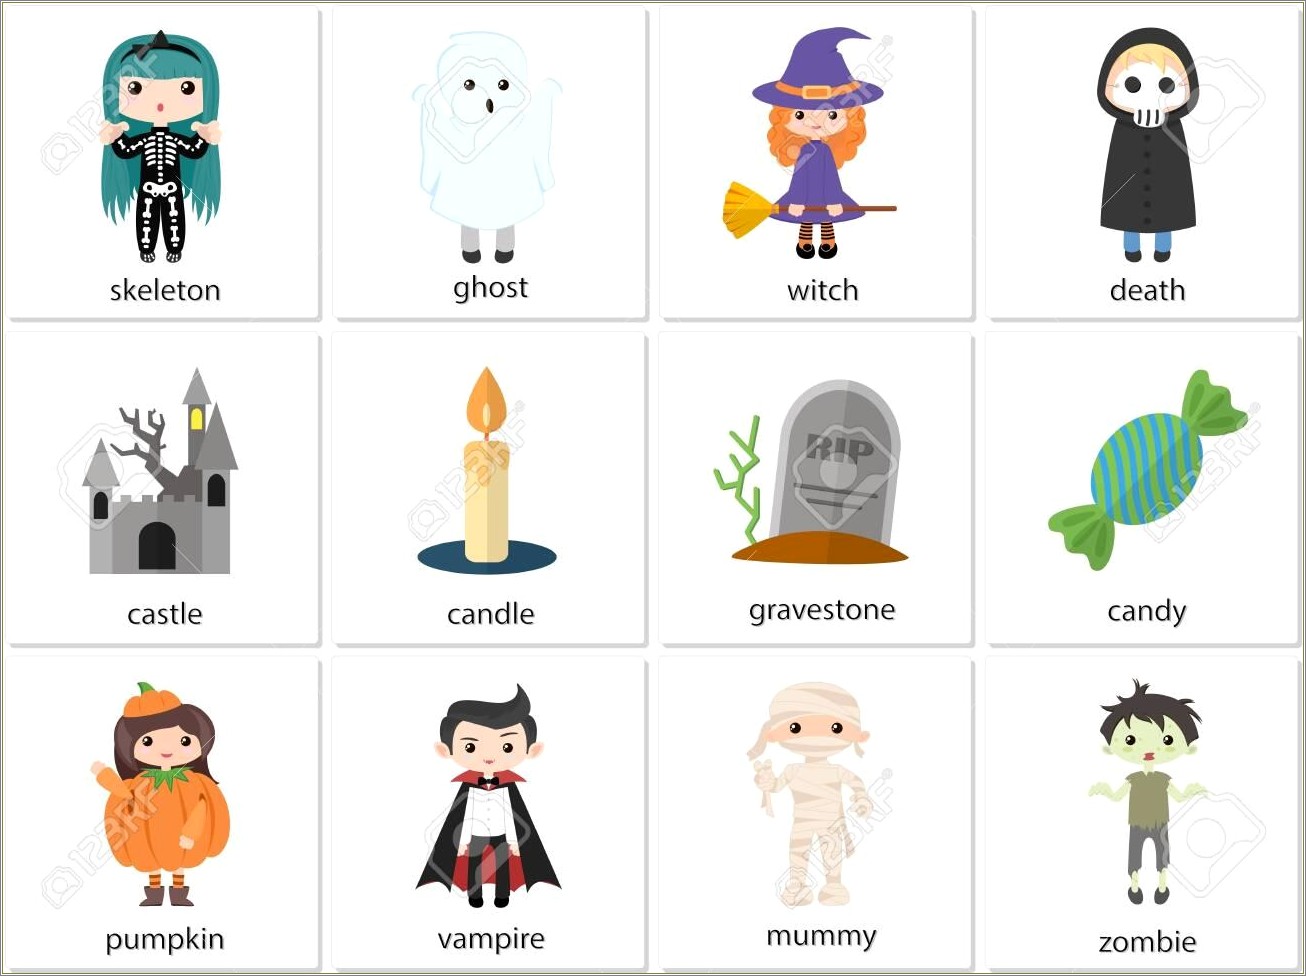 Free Hansel And Gretel Puppet Templates